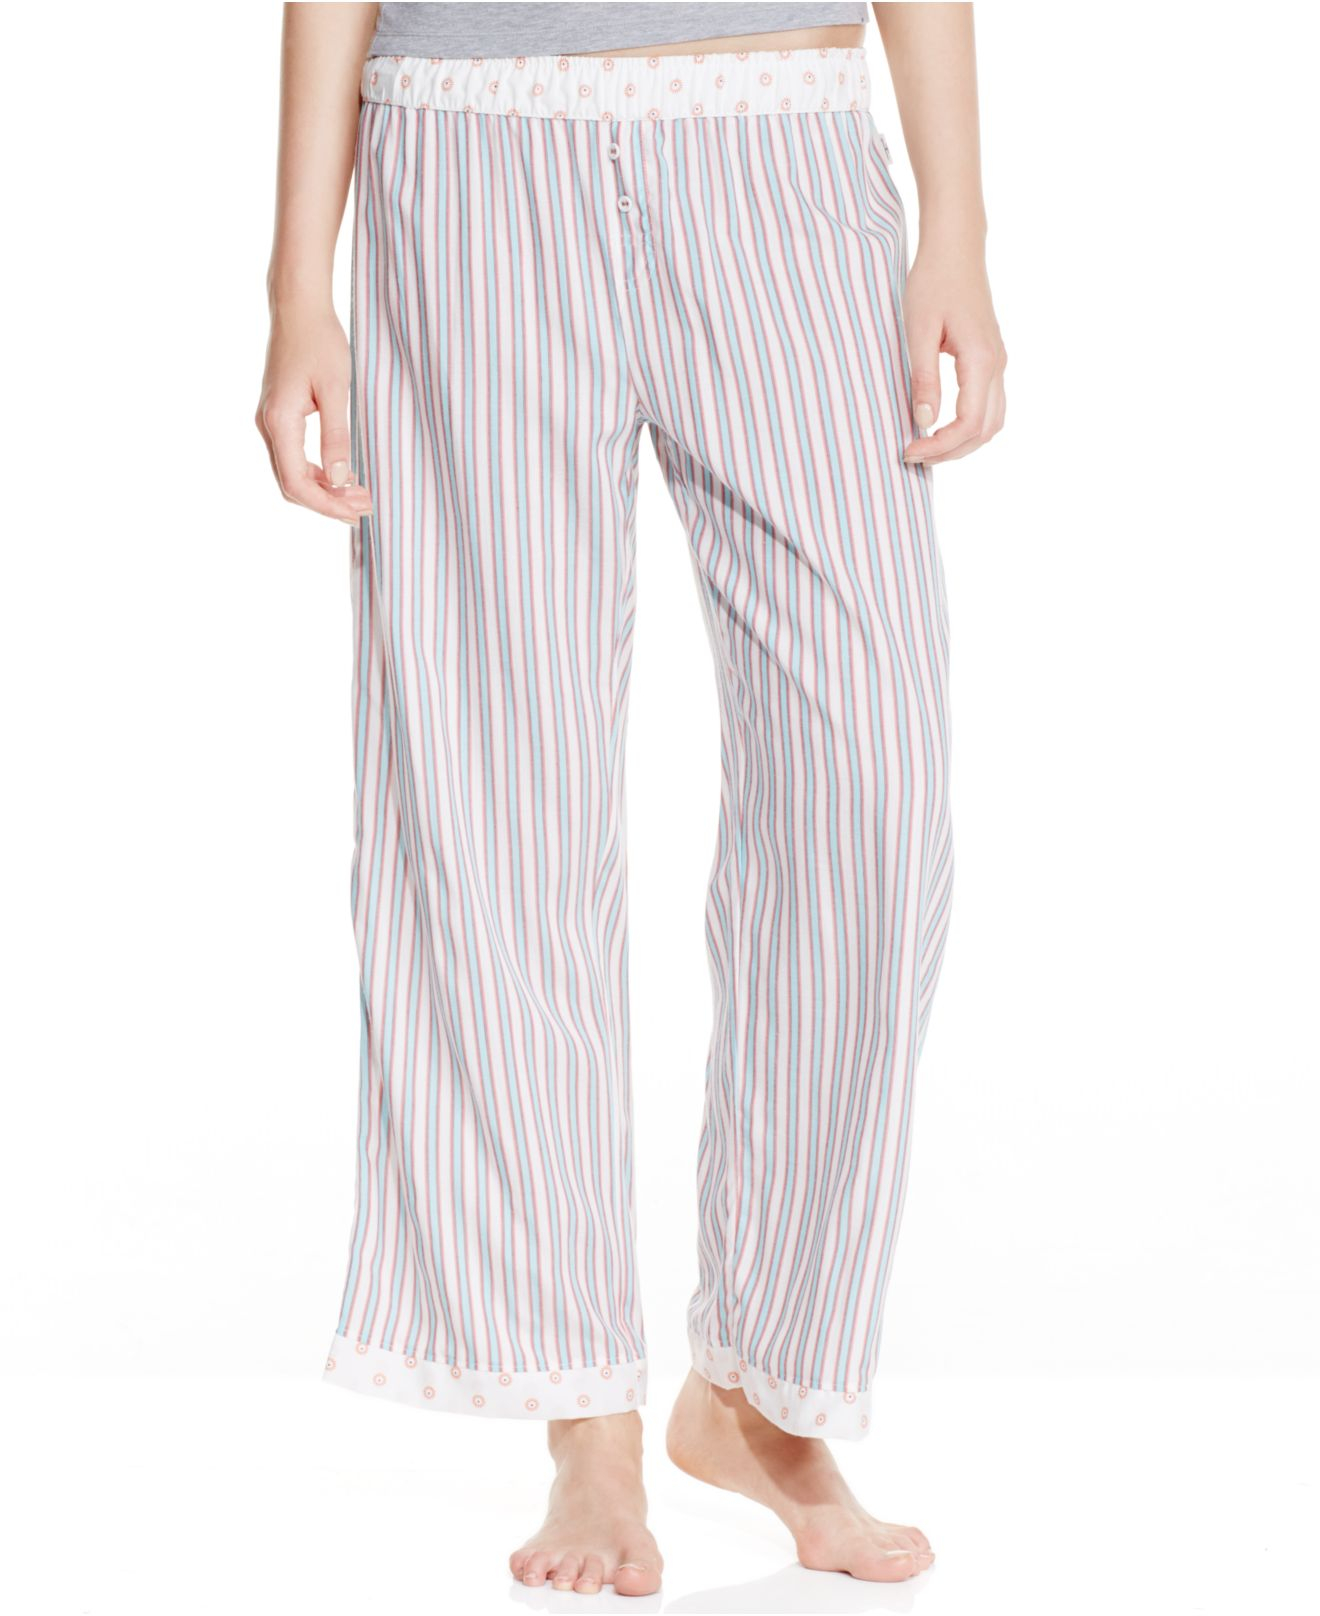 Tommy hilfiger Boarder Print Pajama Pants in Gray | Lyst